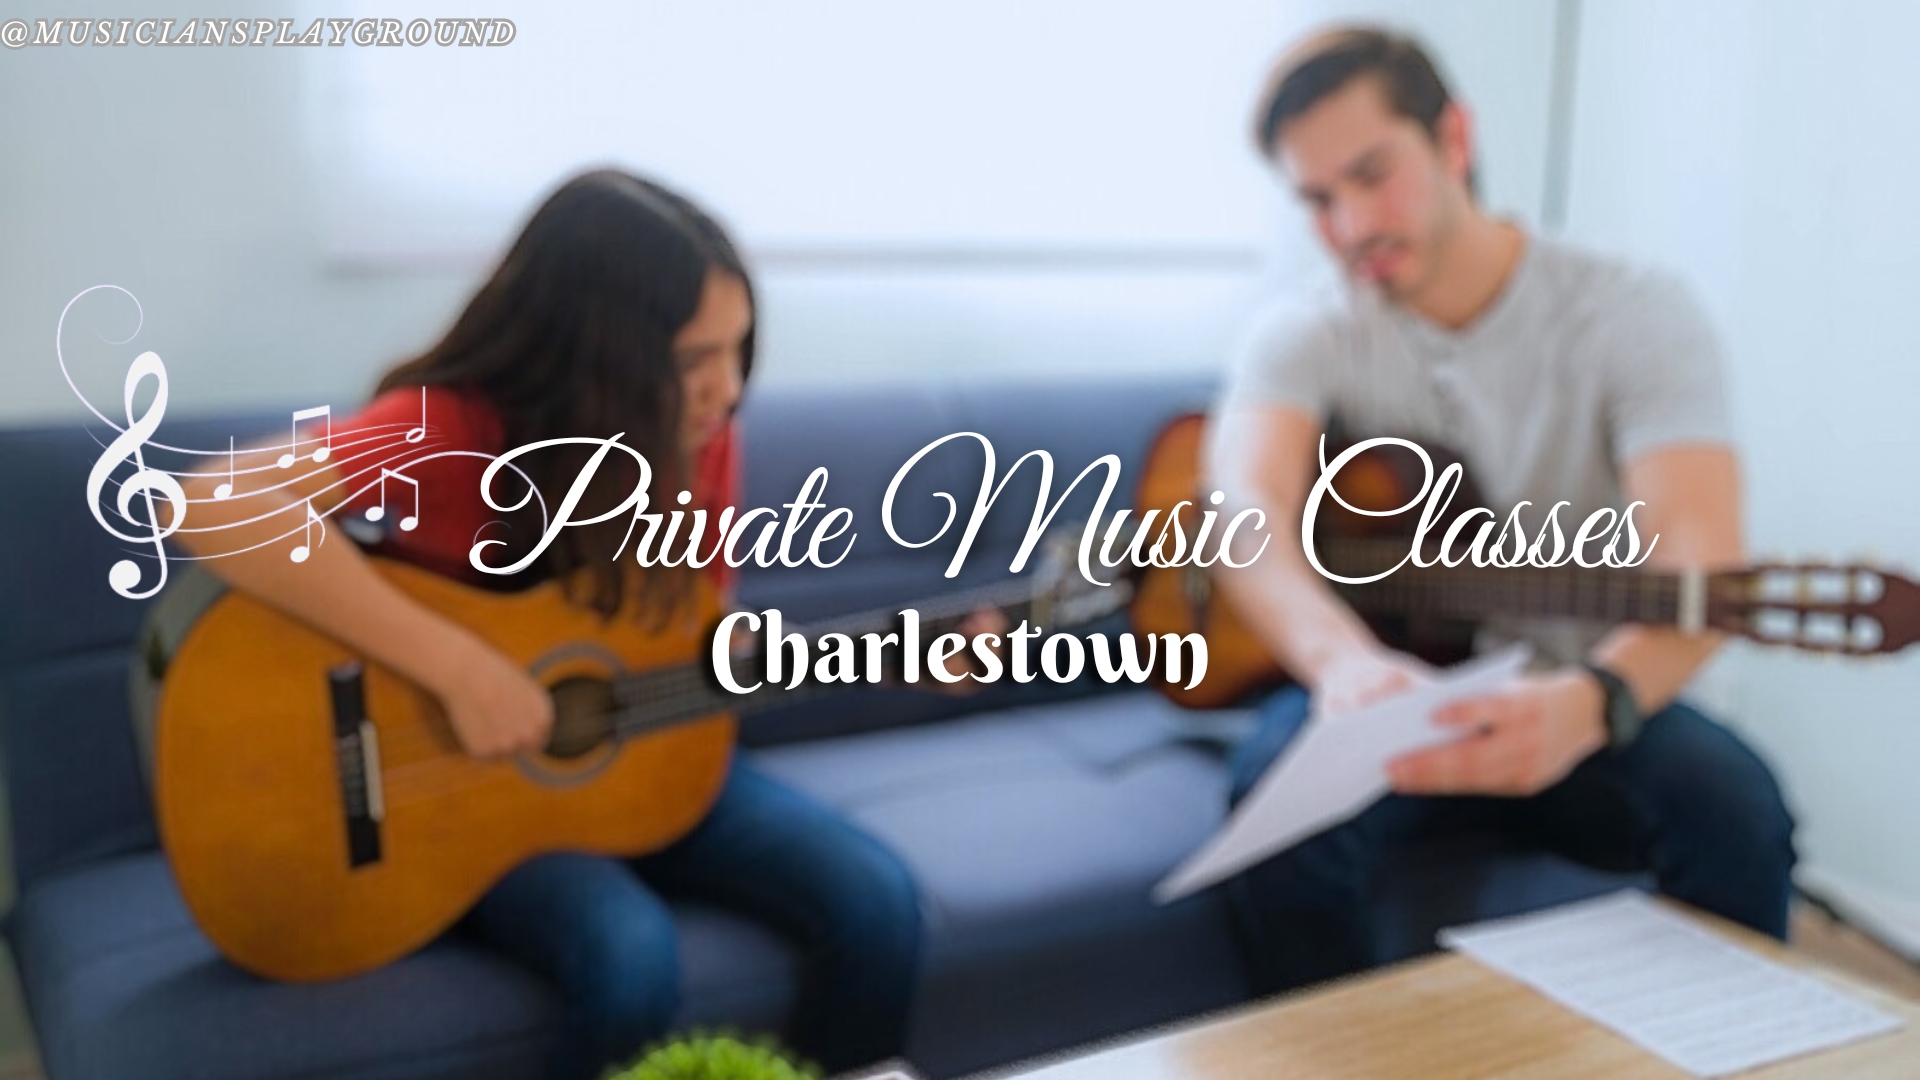 Welcome to Private Music Lessons in Charlestown, Massachusetts